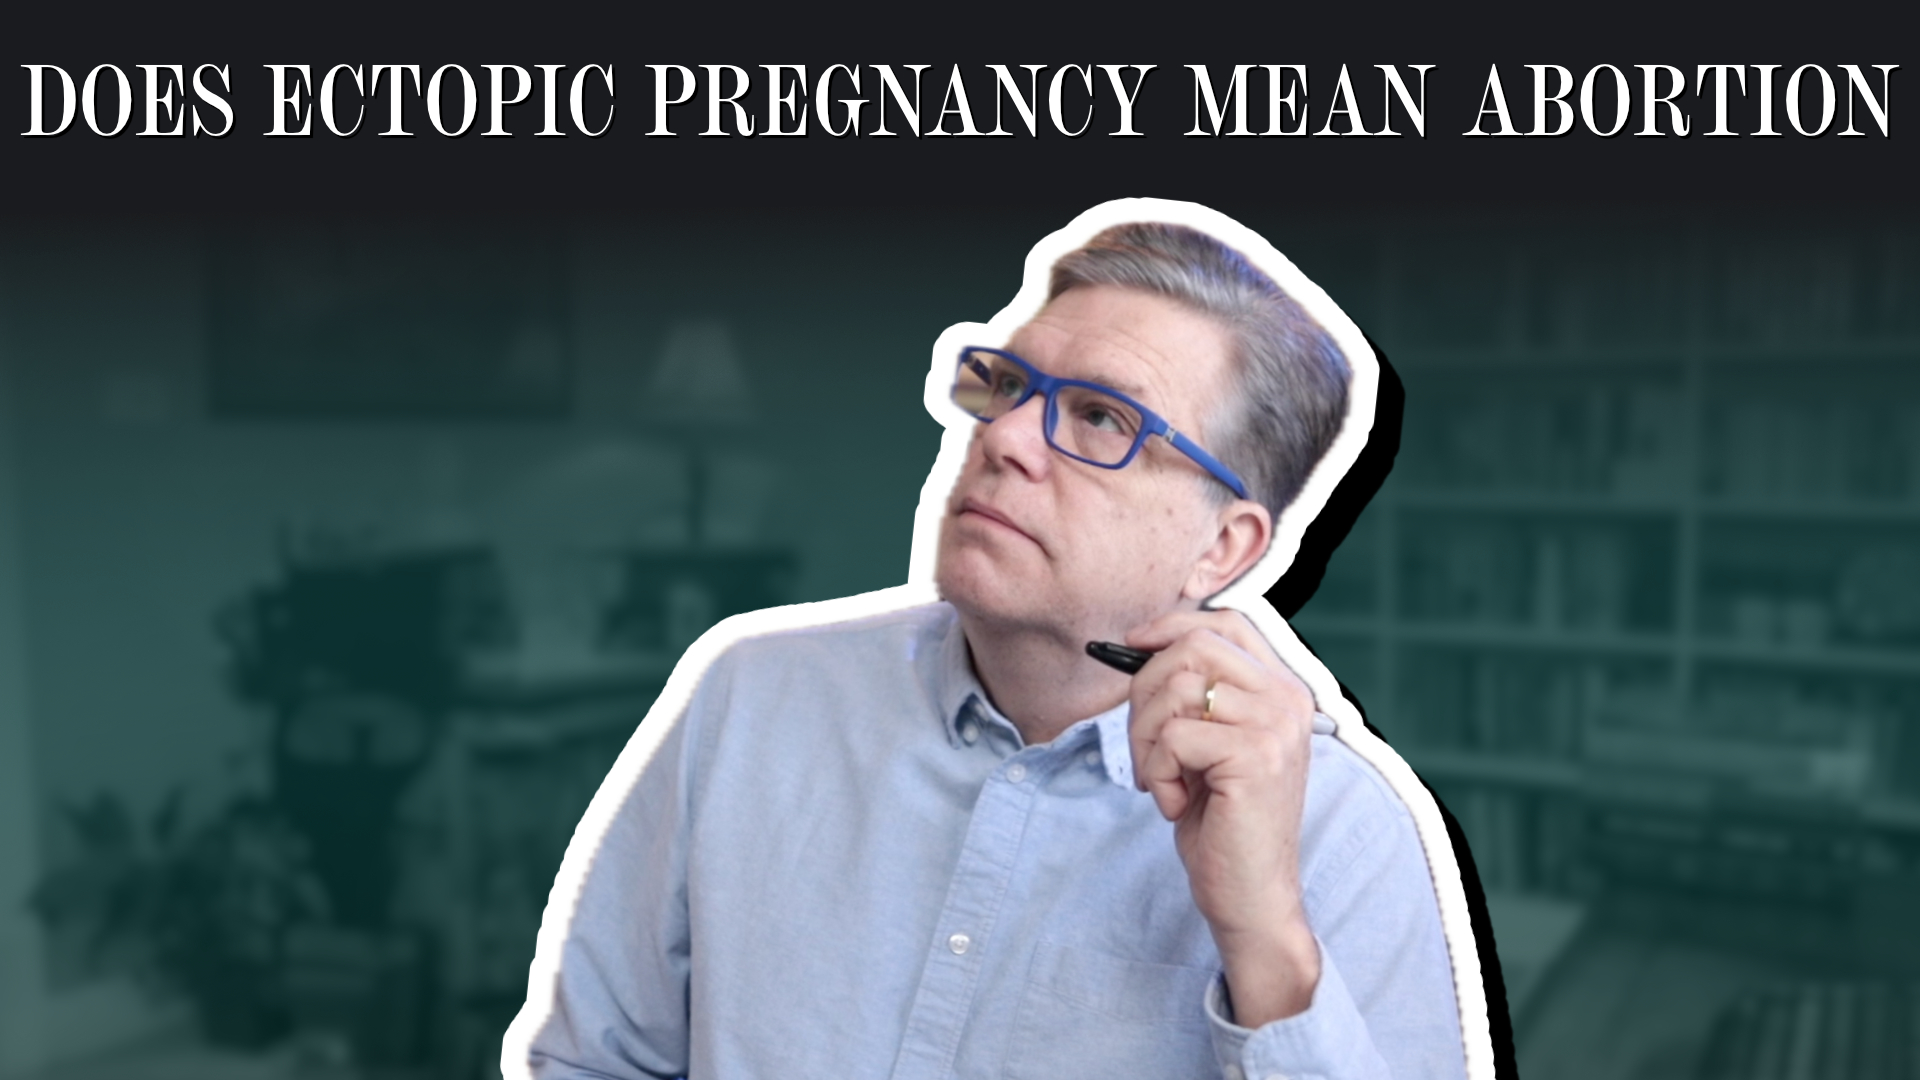 Is removing an ectopic pregnancy the same as having an abortion?